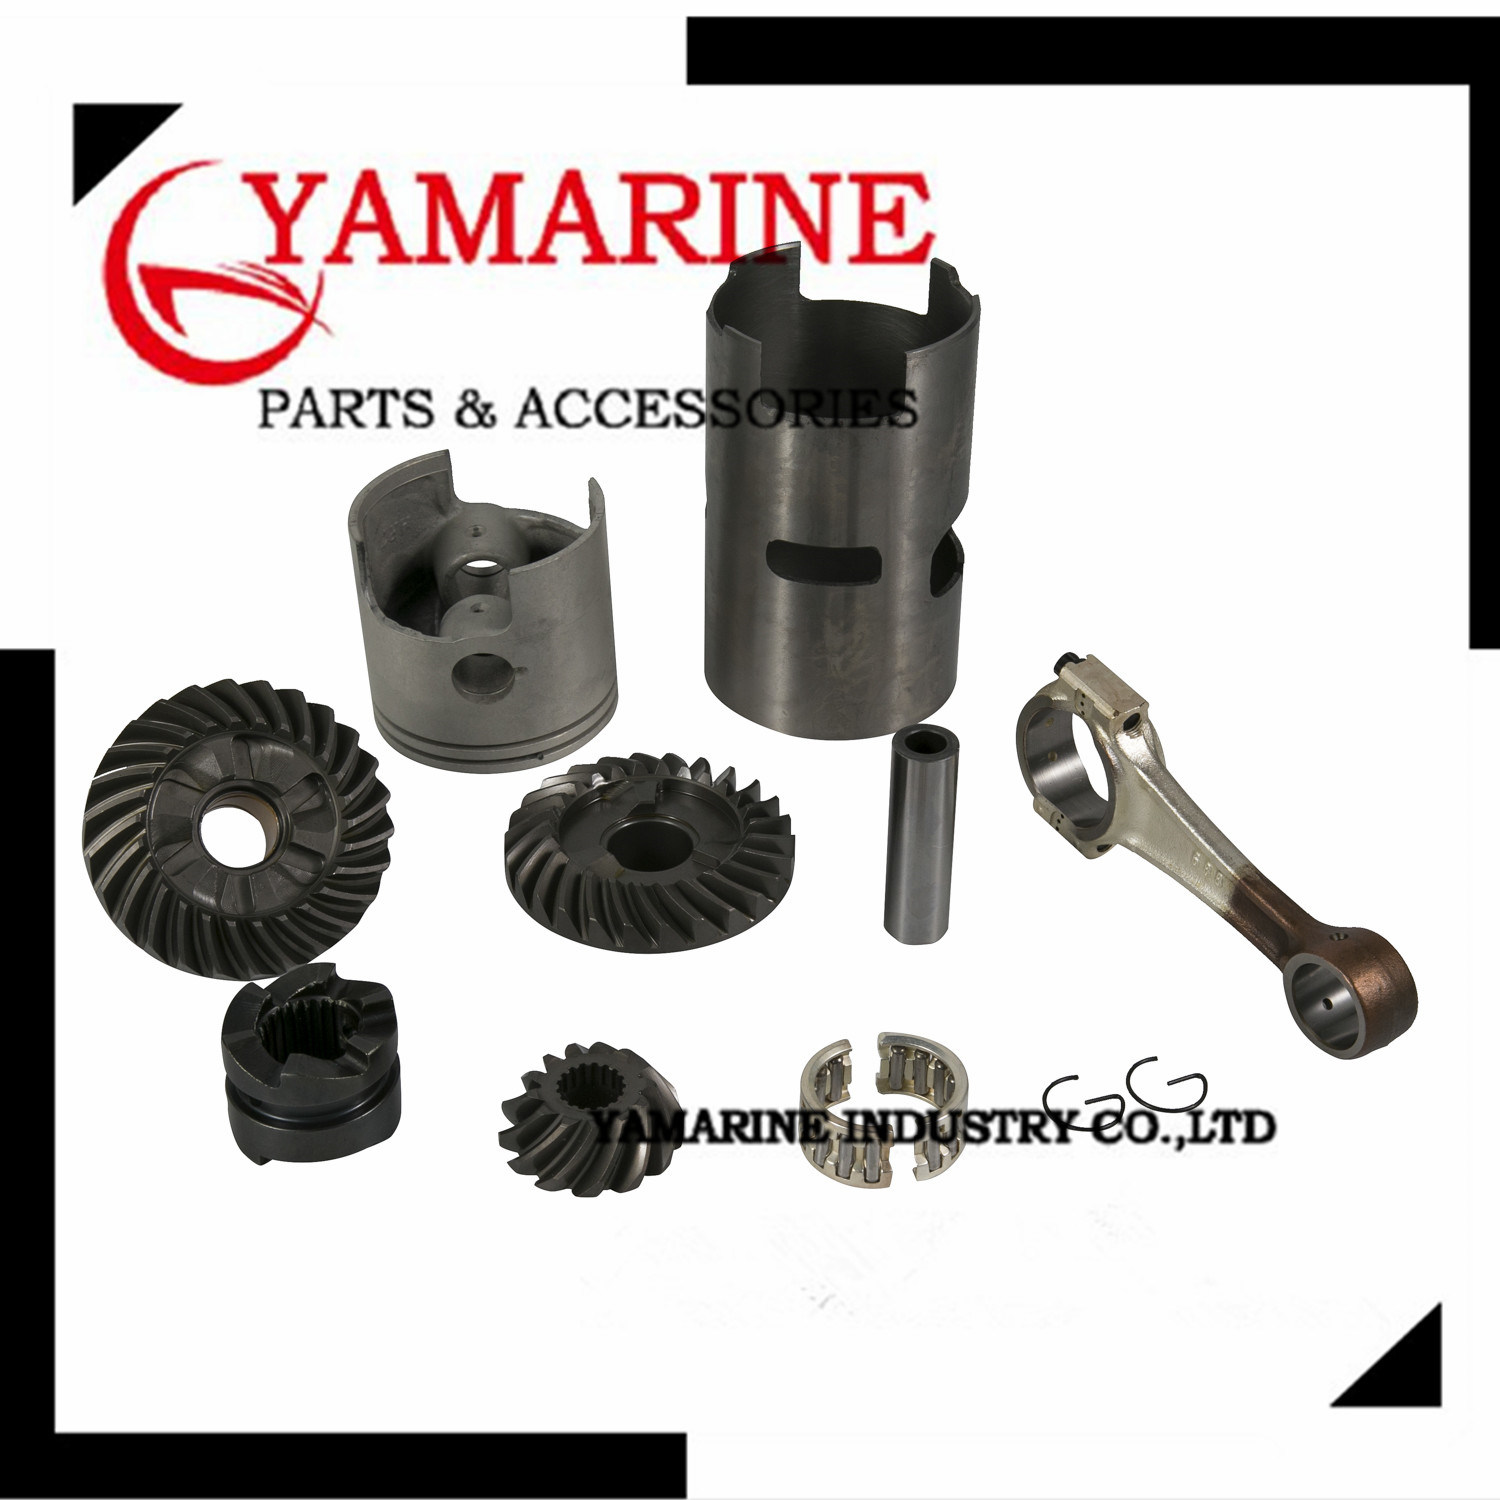 75HP/85HP YAMAHA Outboard Engine Parts, Gears, Piston Kit, Liner Sleeve, Connecting Rod